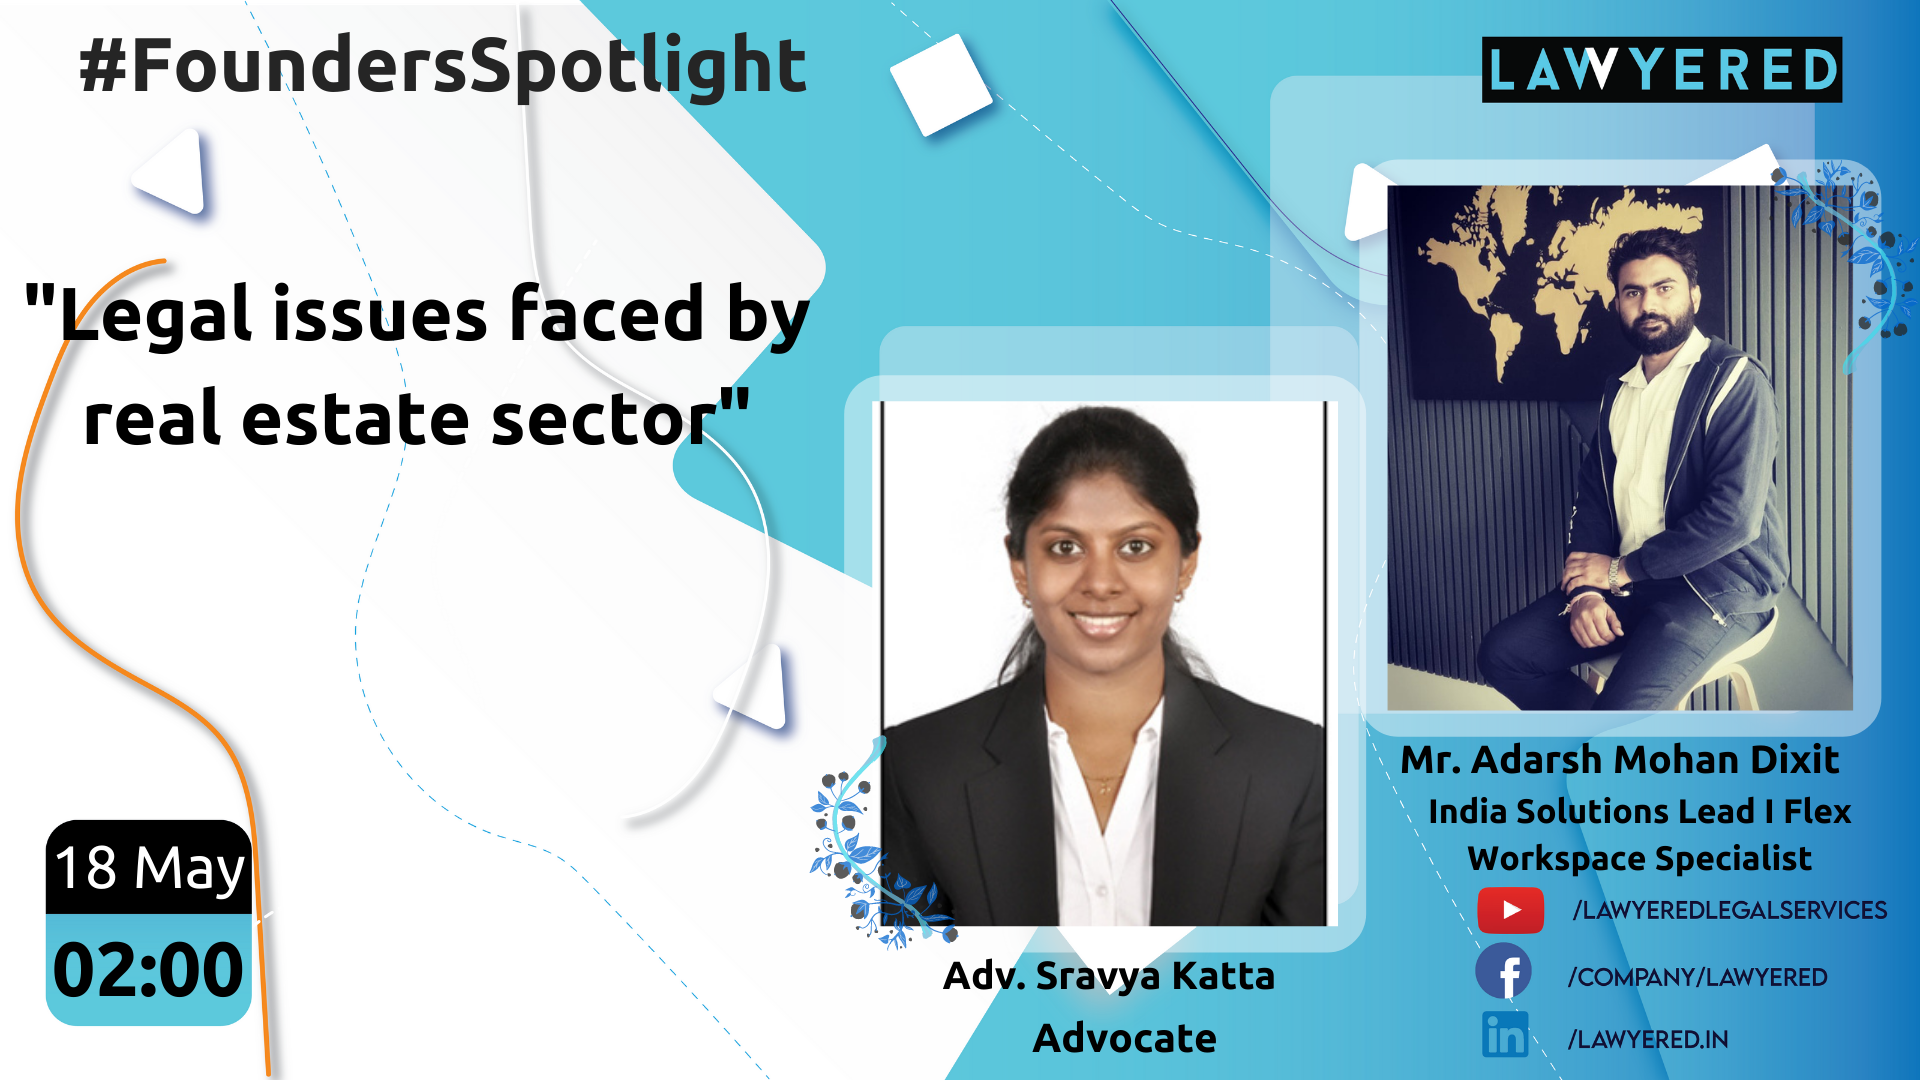 #FounderSpotlight on Legal issues faced by real estate sector with Adv. Sravya Katta Katta